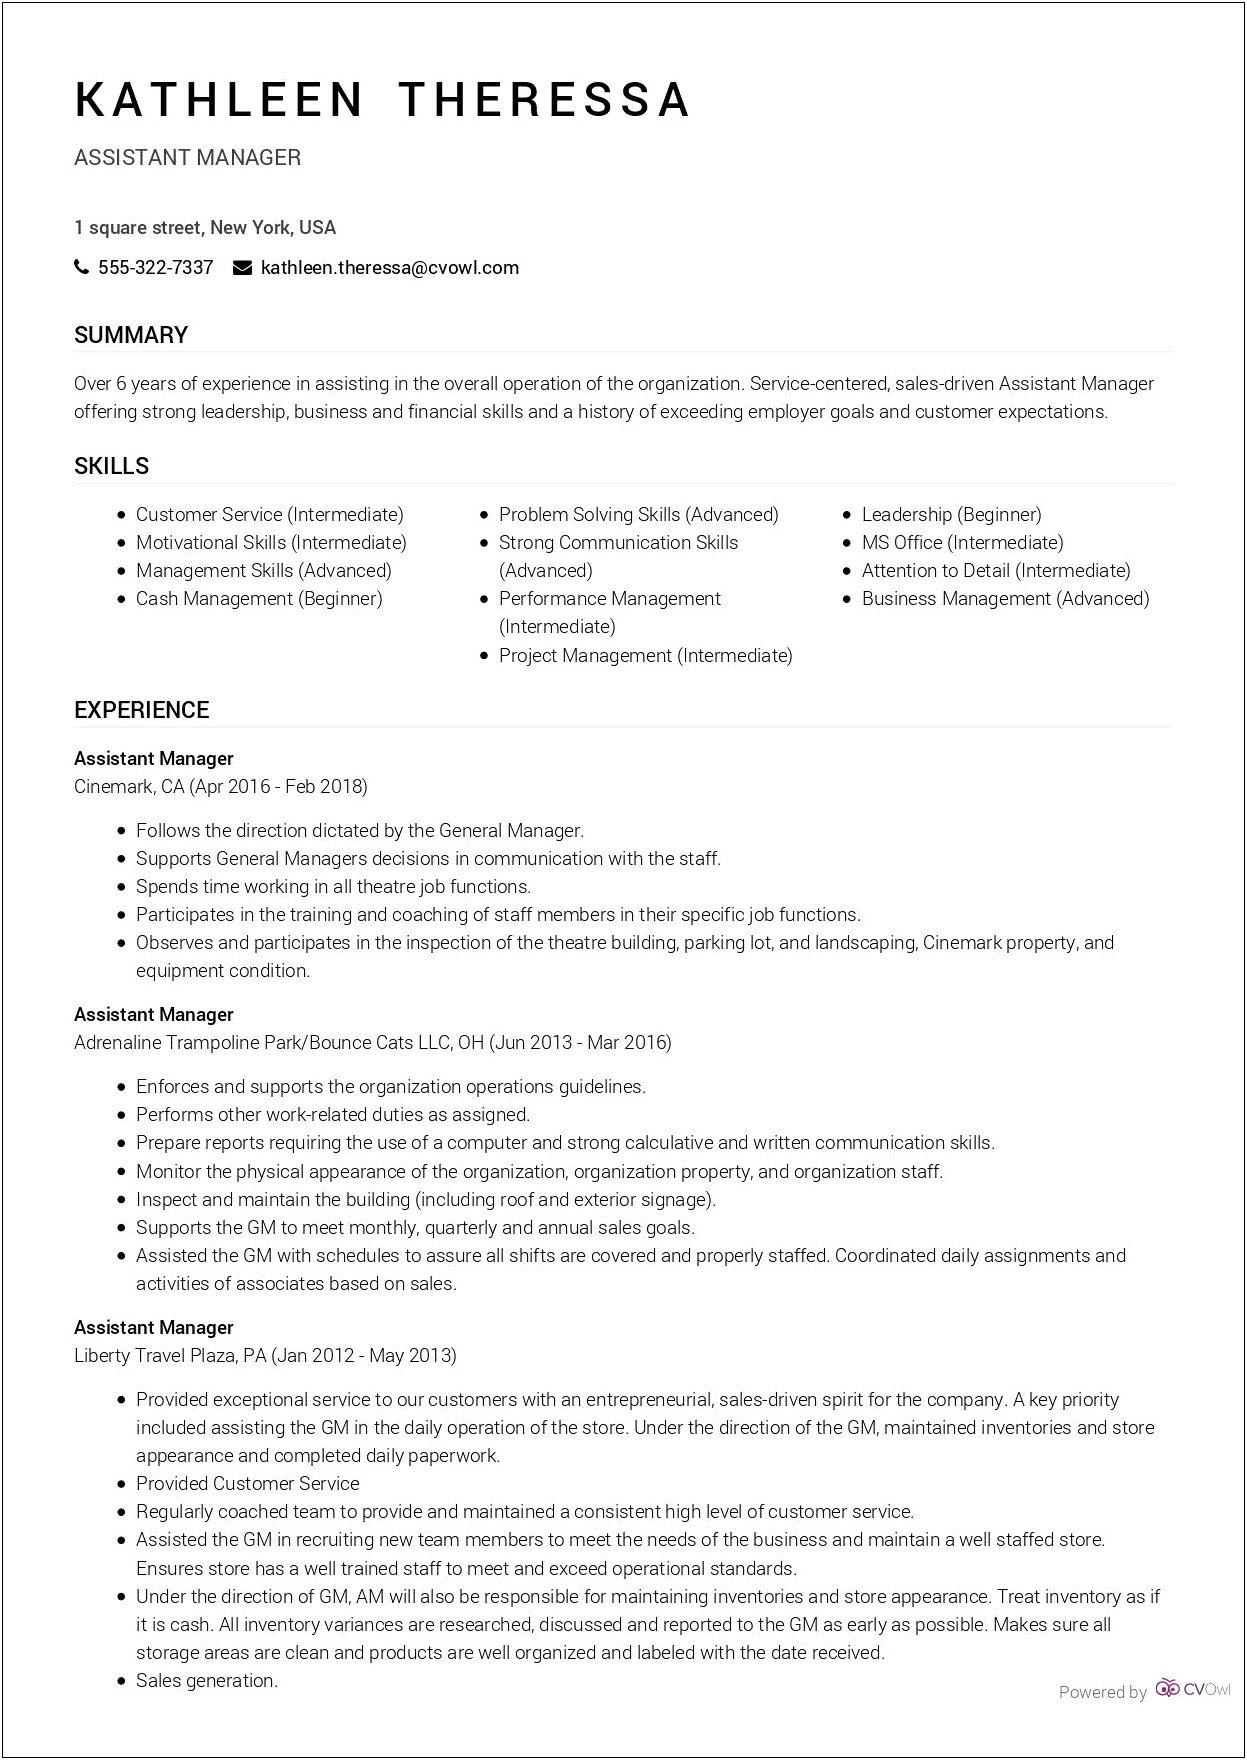 Resume Format For Assistant Manager Operations